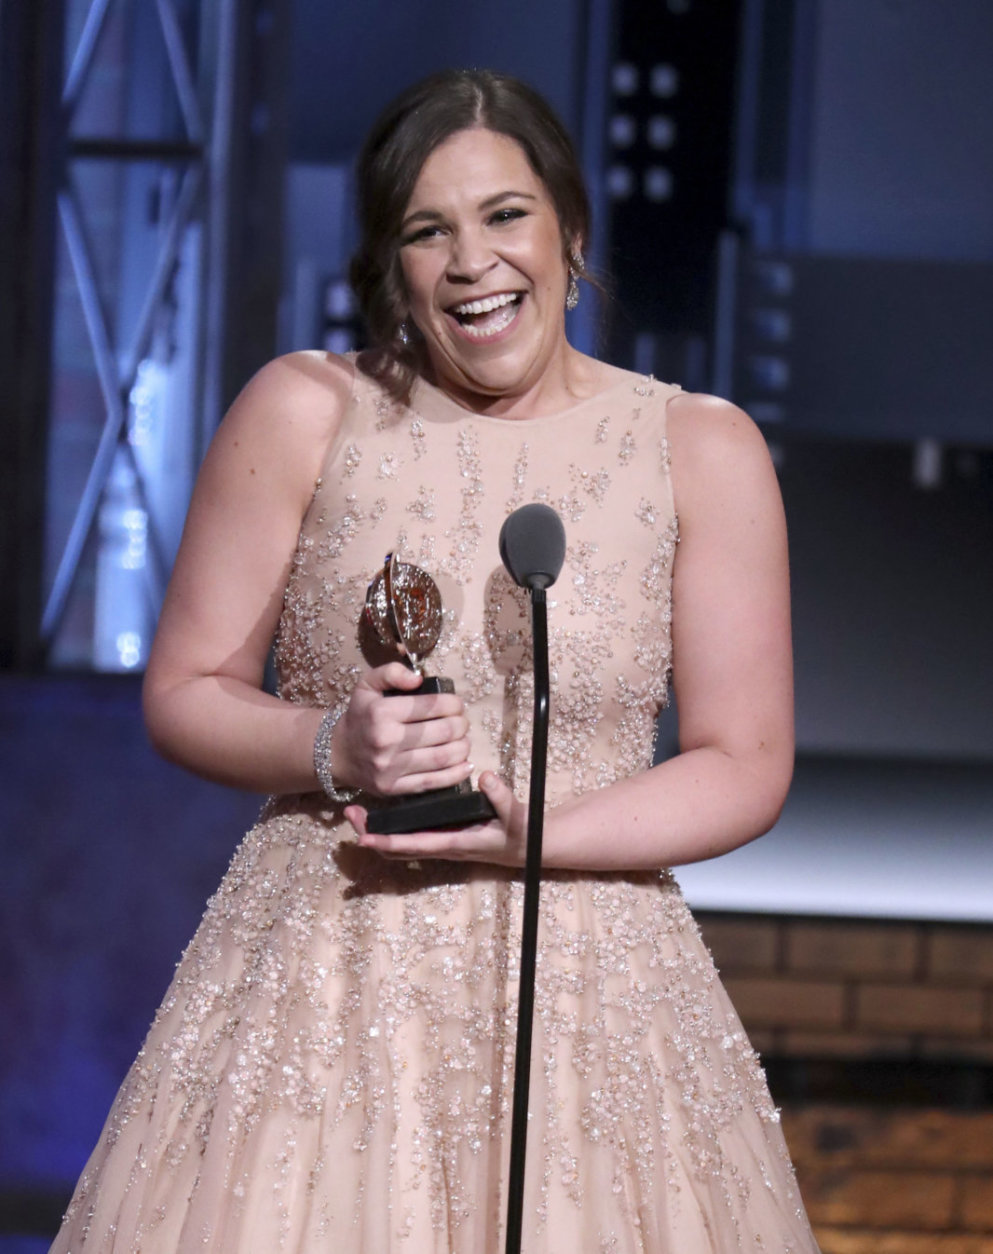 Lindsay Mendez accepts the award for best performance by an actress in a featured role in a musical for "Rodgers &amp; Hammerstein's Carousel" at the 72nd annual Tony Awards at Radio City Music Hall on Sunday, June 10, 2018, in New York. (Photo by Michael Zorn/Invision/AP)